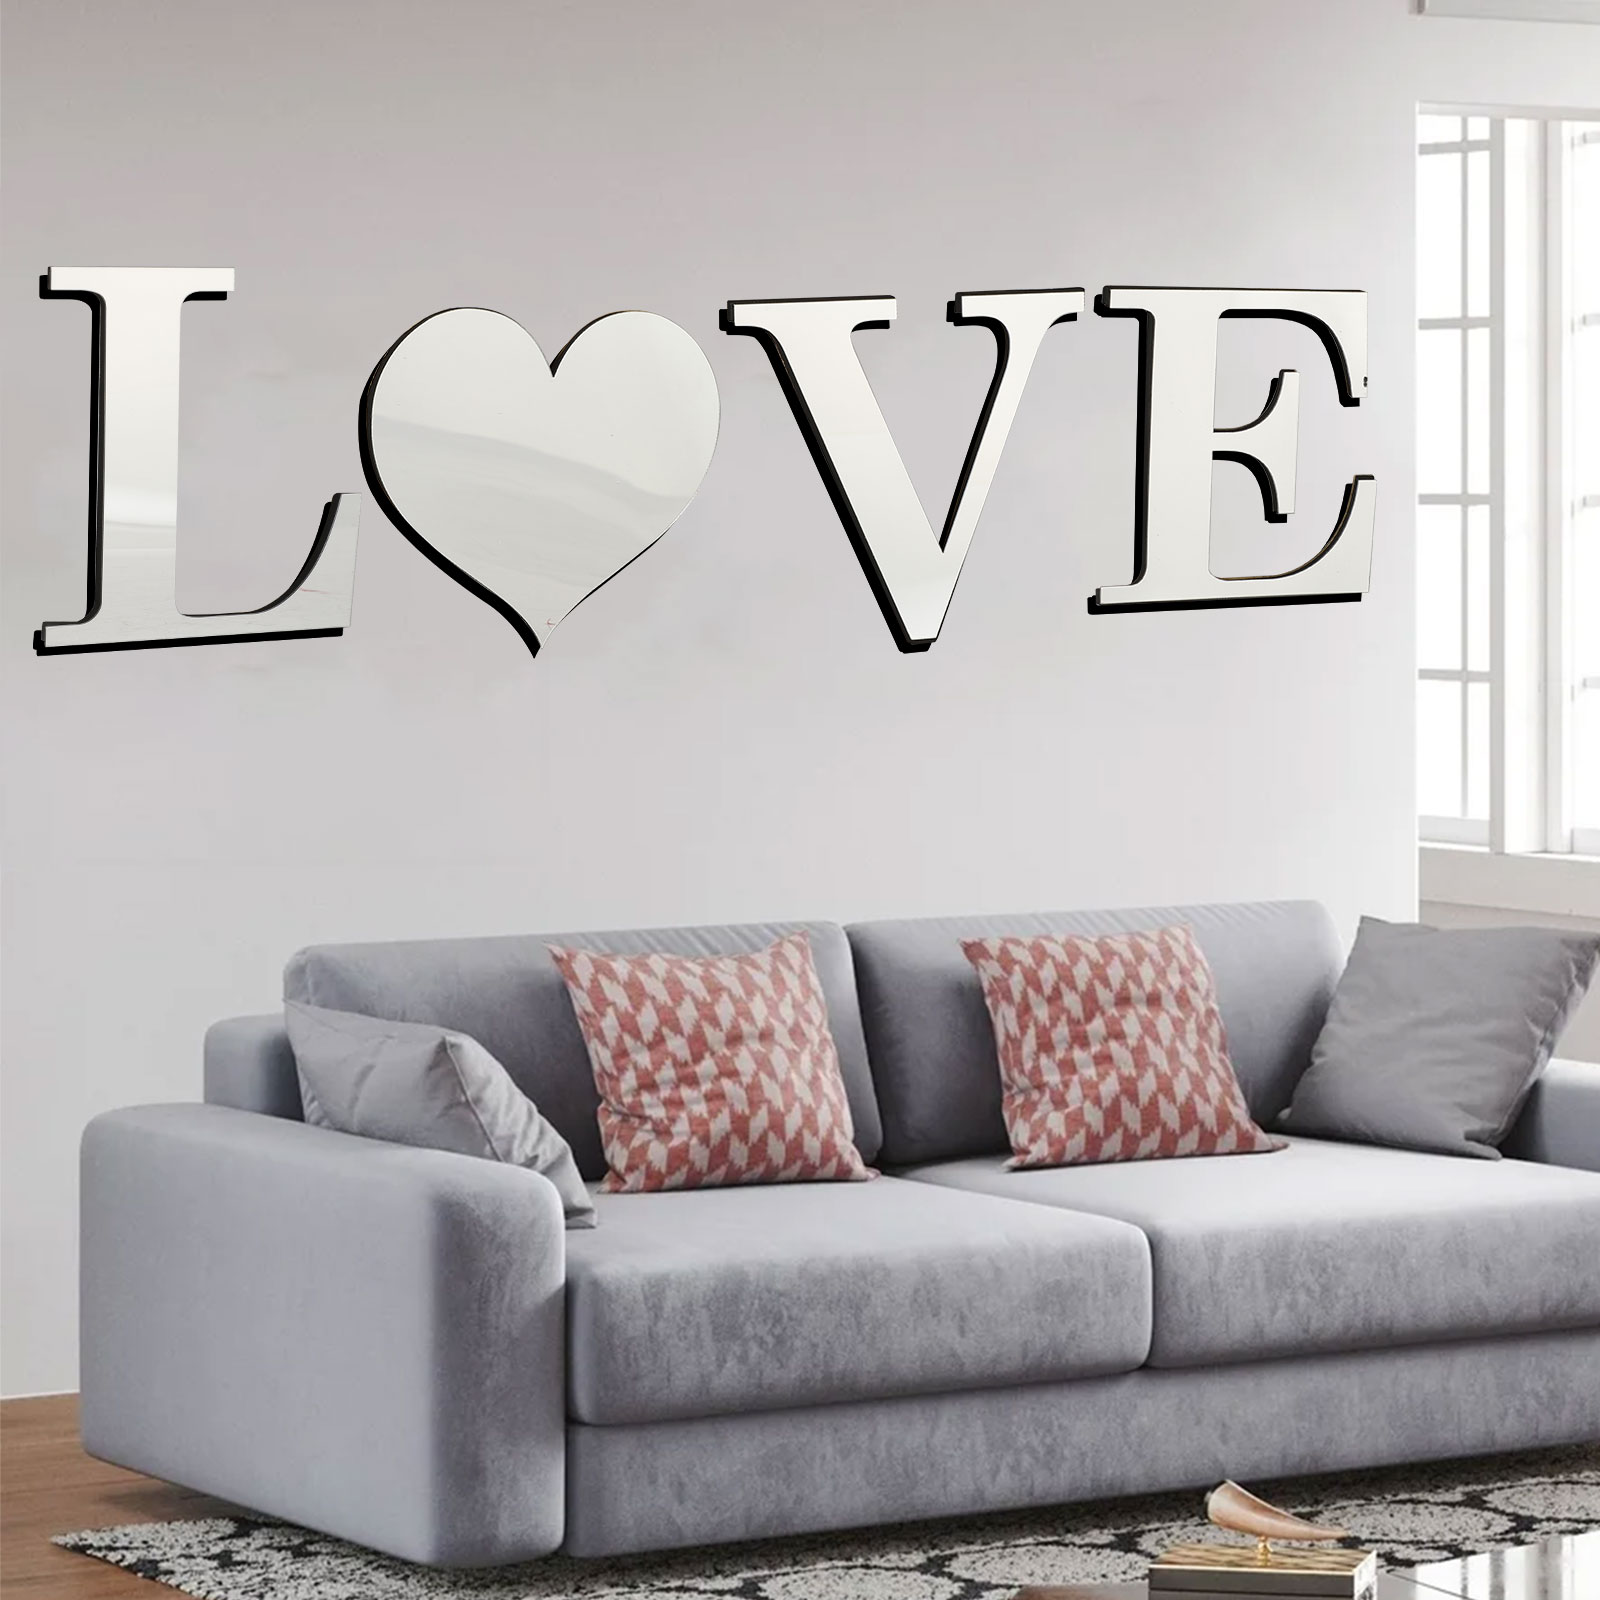 10PCS Removable Self Adhesive Wall Sticker Decal Home Room DIY Decoration 